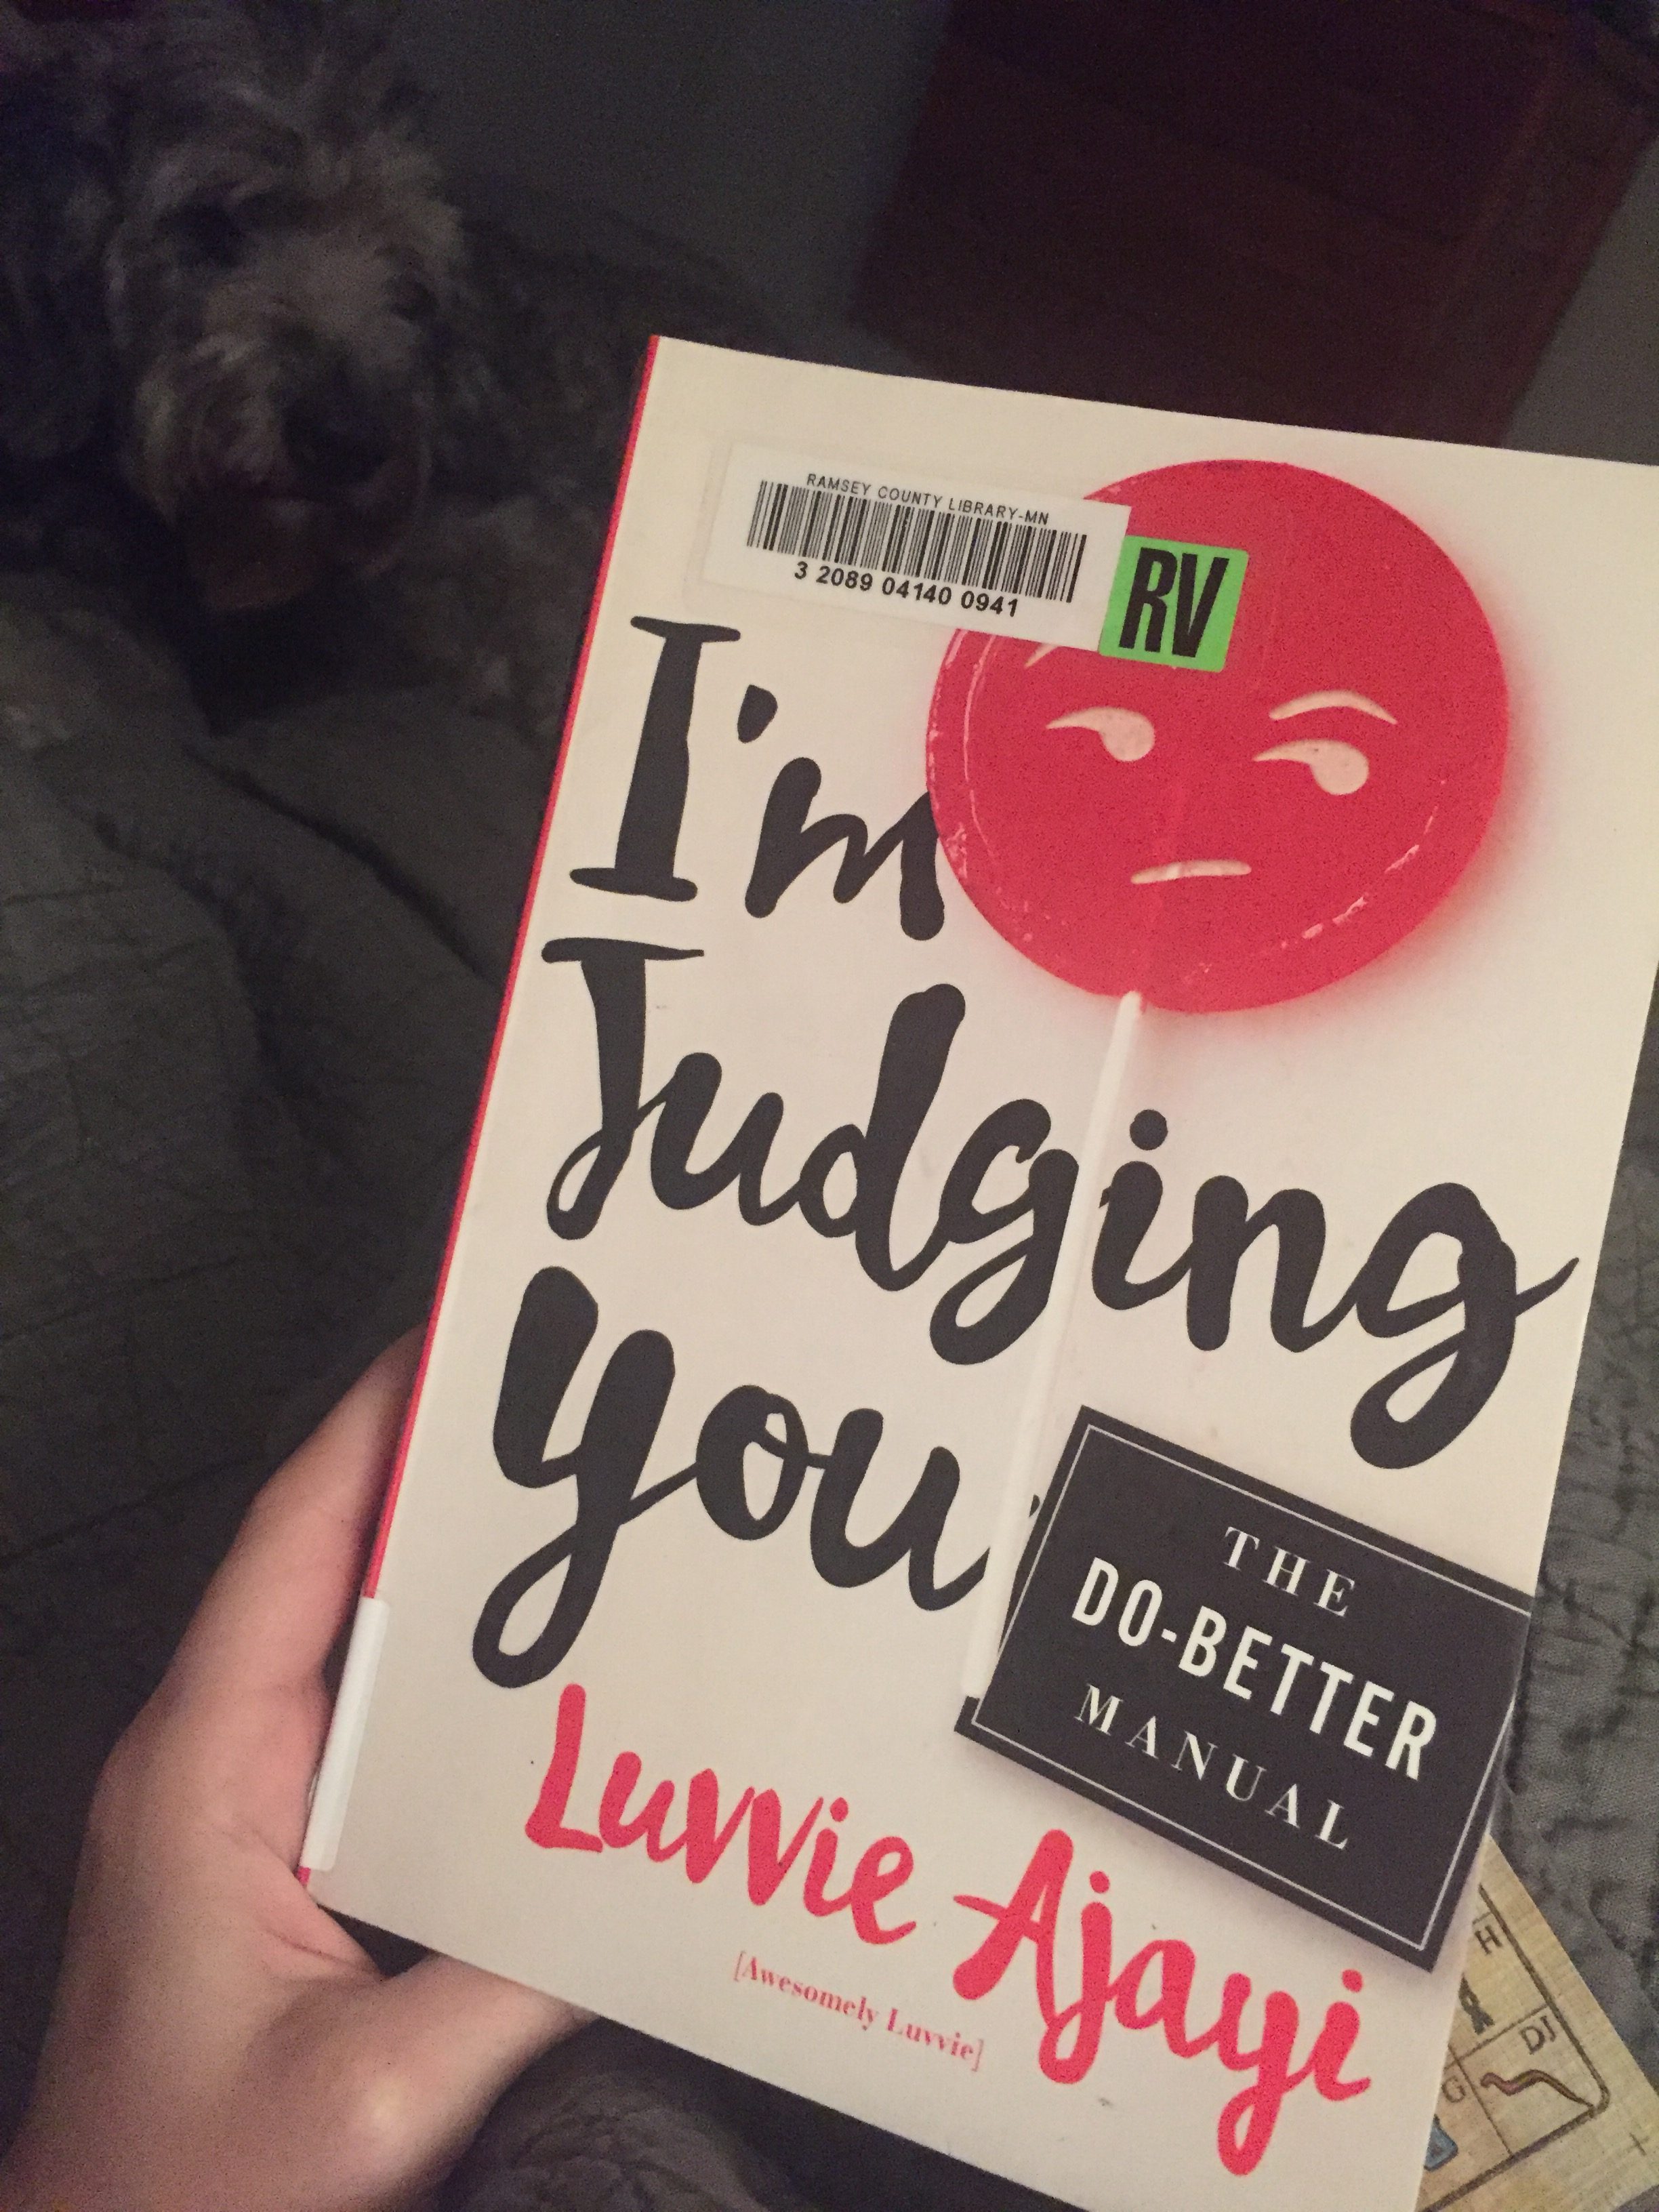 I'm judging you by luvvie ajayi